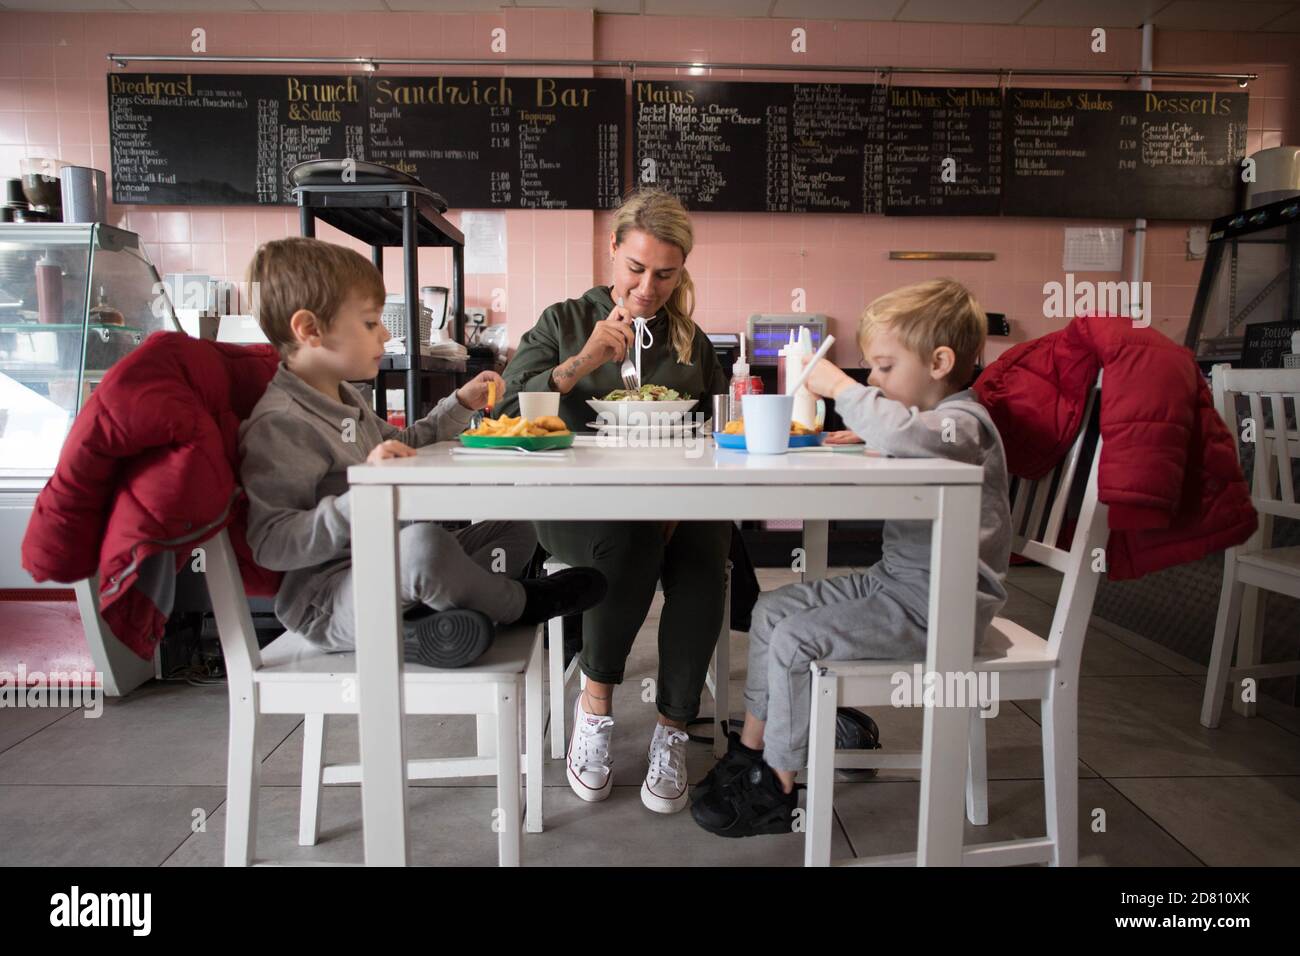 RETRANSMITTING ADDING NAMES Leigh Anderson, with her sons Charlie Brown (left) and Albie Brown, eat a meal at the Kitchen cafe in Bermondsey, London, are providing free school meals for children over the half term holidays. Local councils and businesses are continuing to pledge free food for children in need during this week's half term break after the Government defeated a Labour motion to extend free school meals provision in England over the holidays. Stock Photo